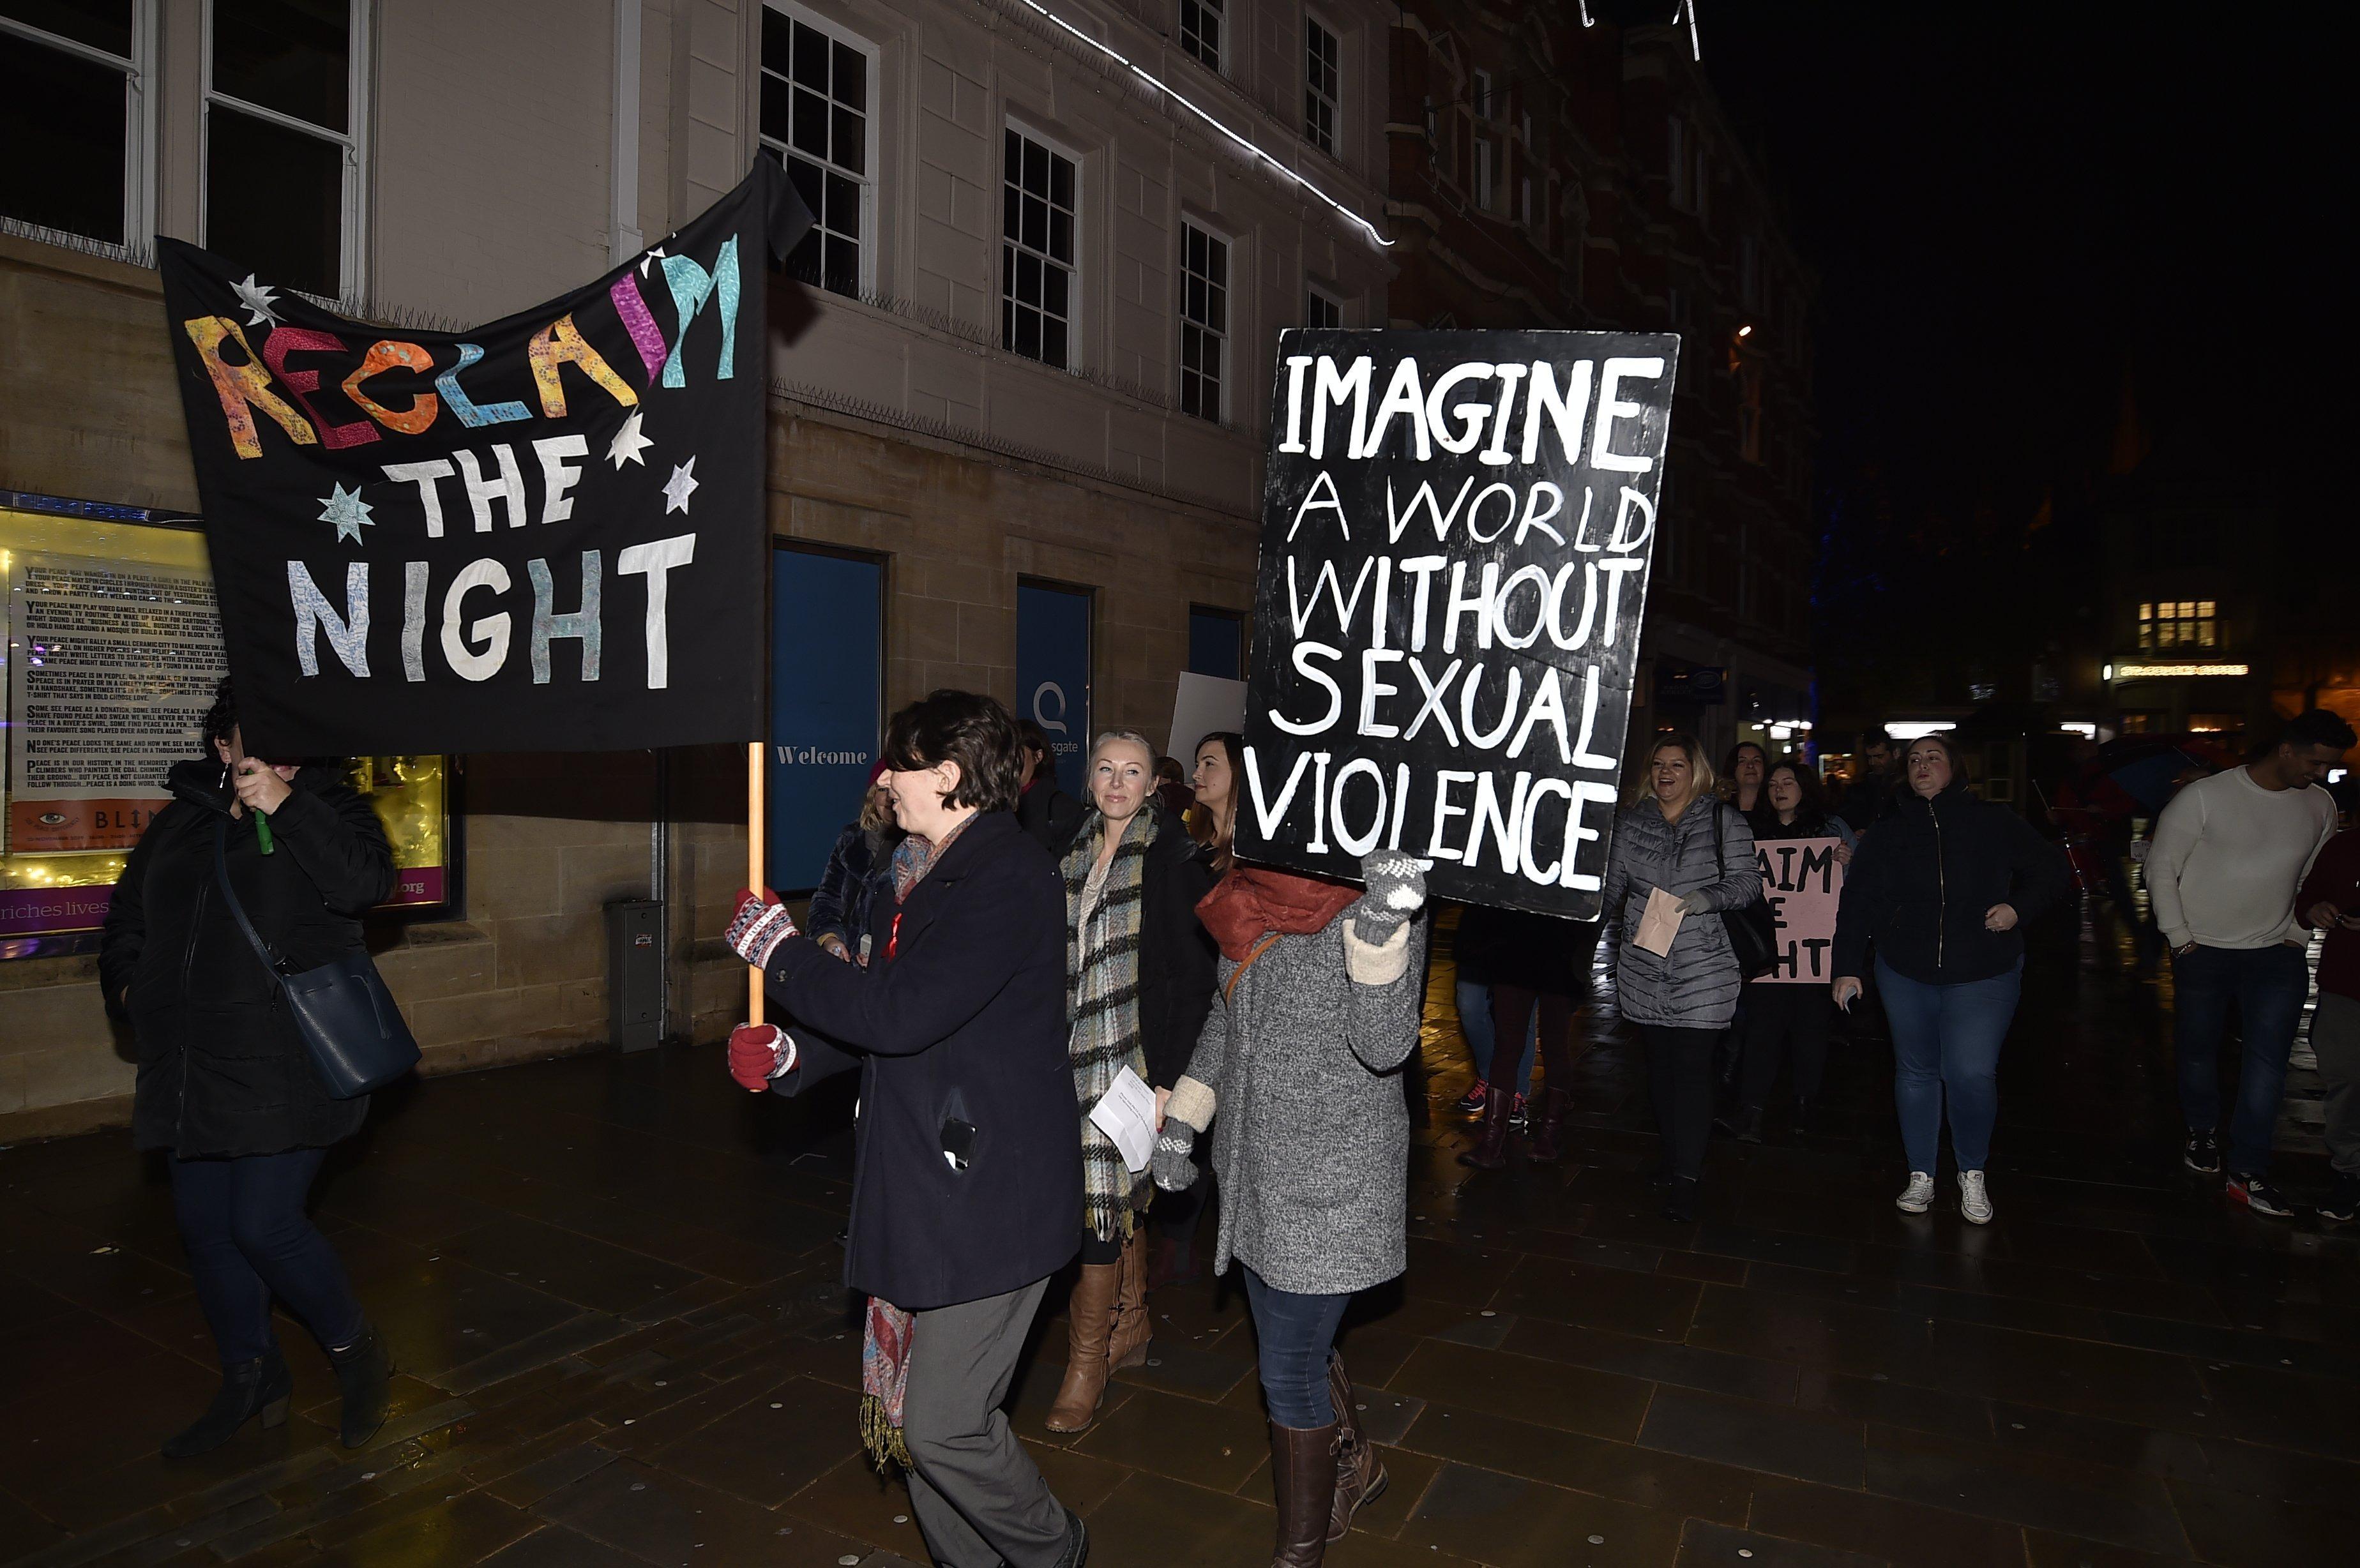 Reclaim the Night march in the City centre. EMN-191124-132208009